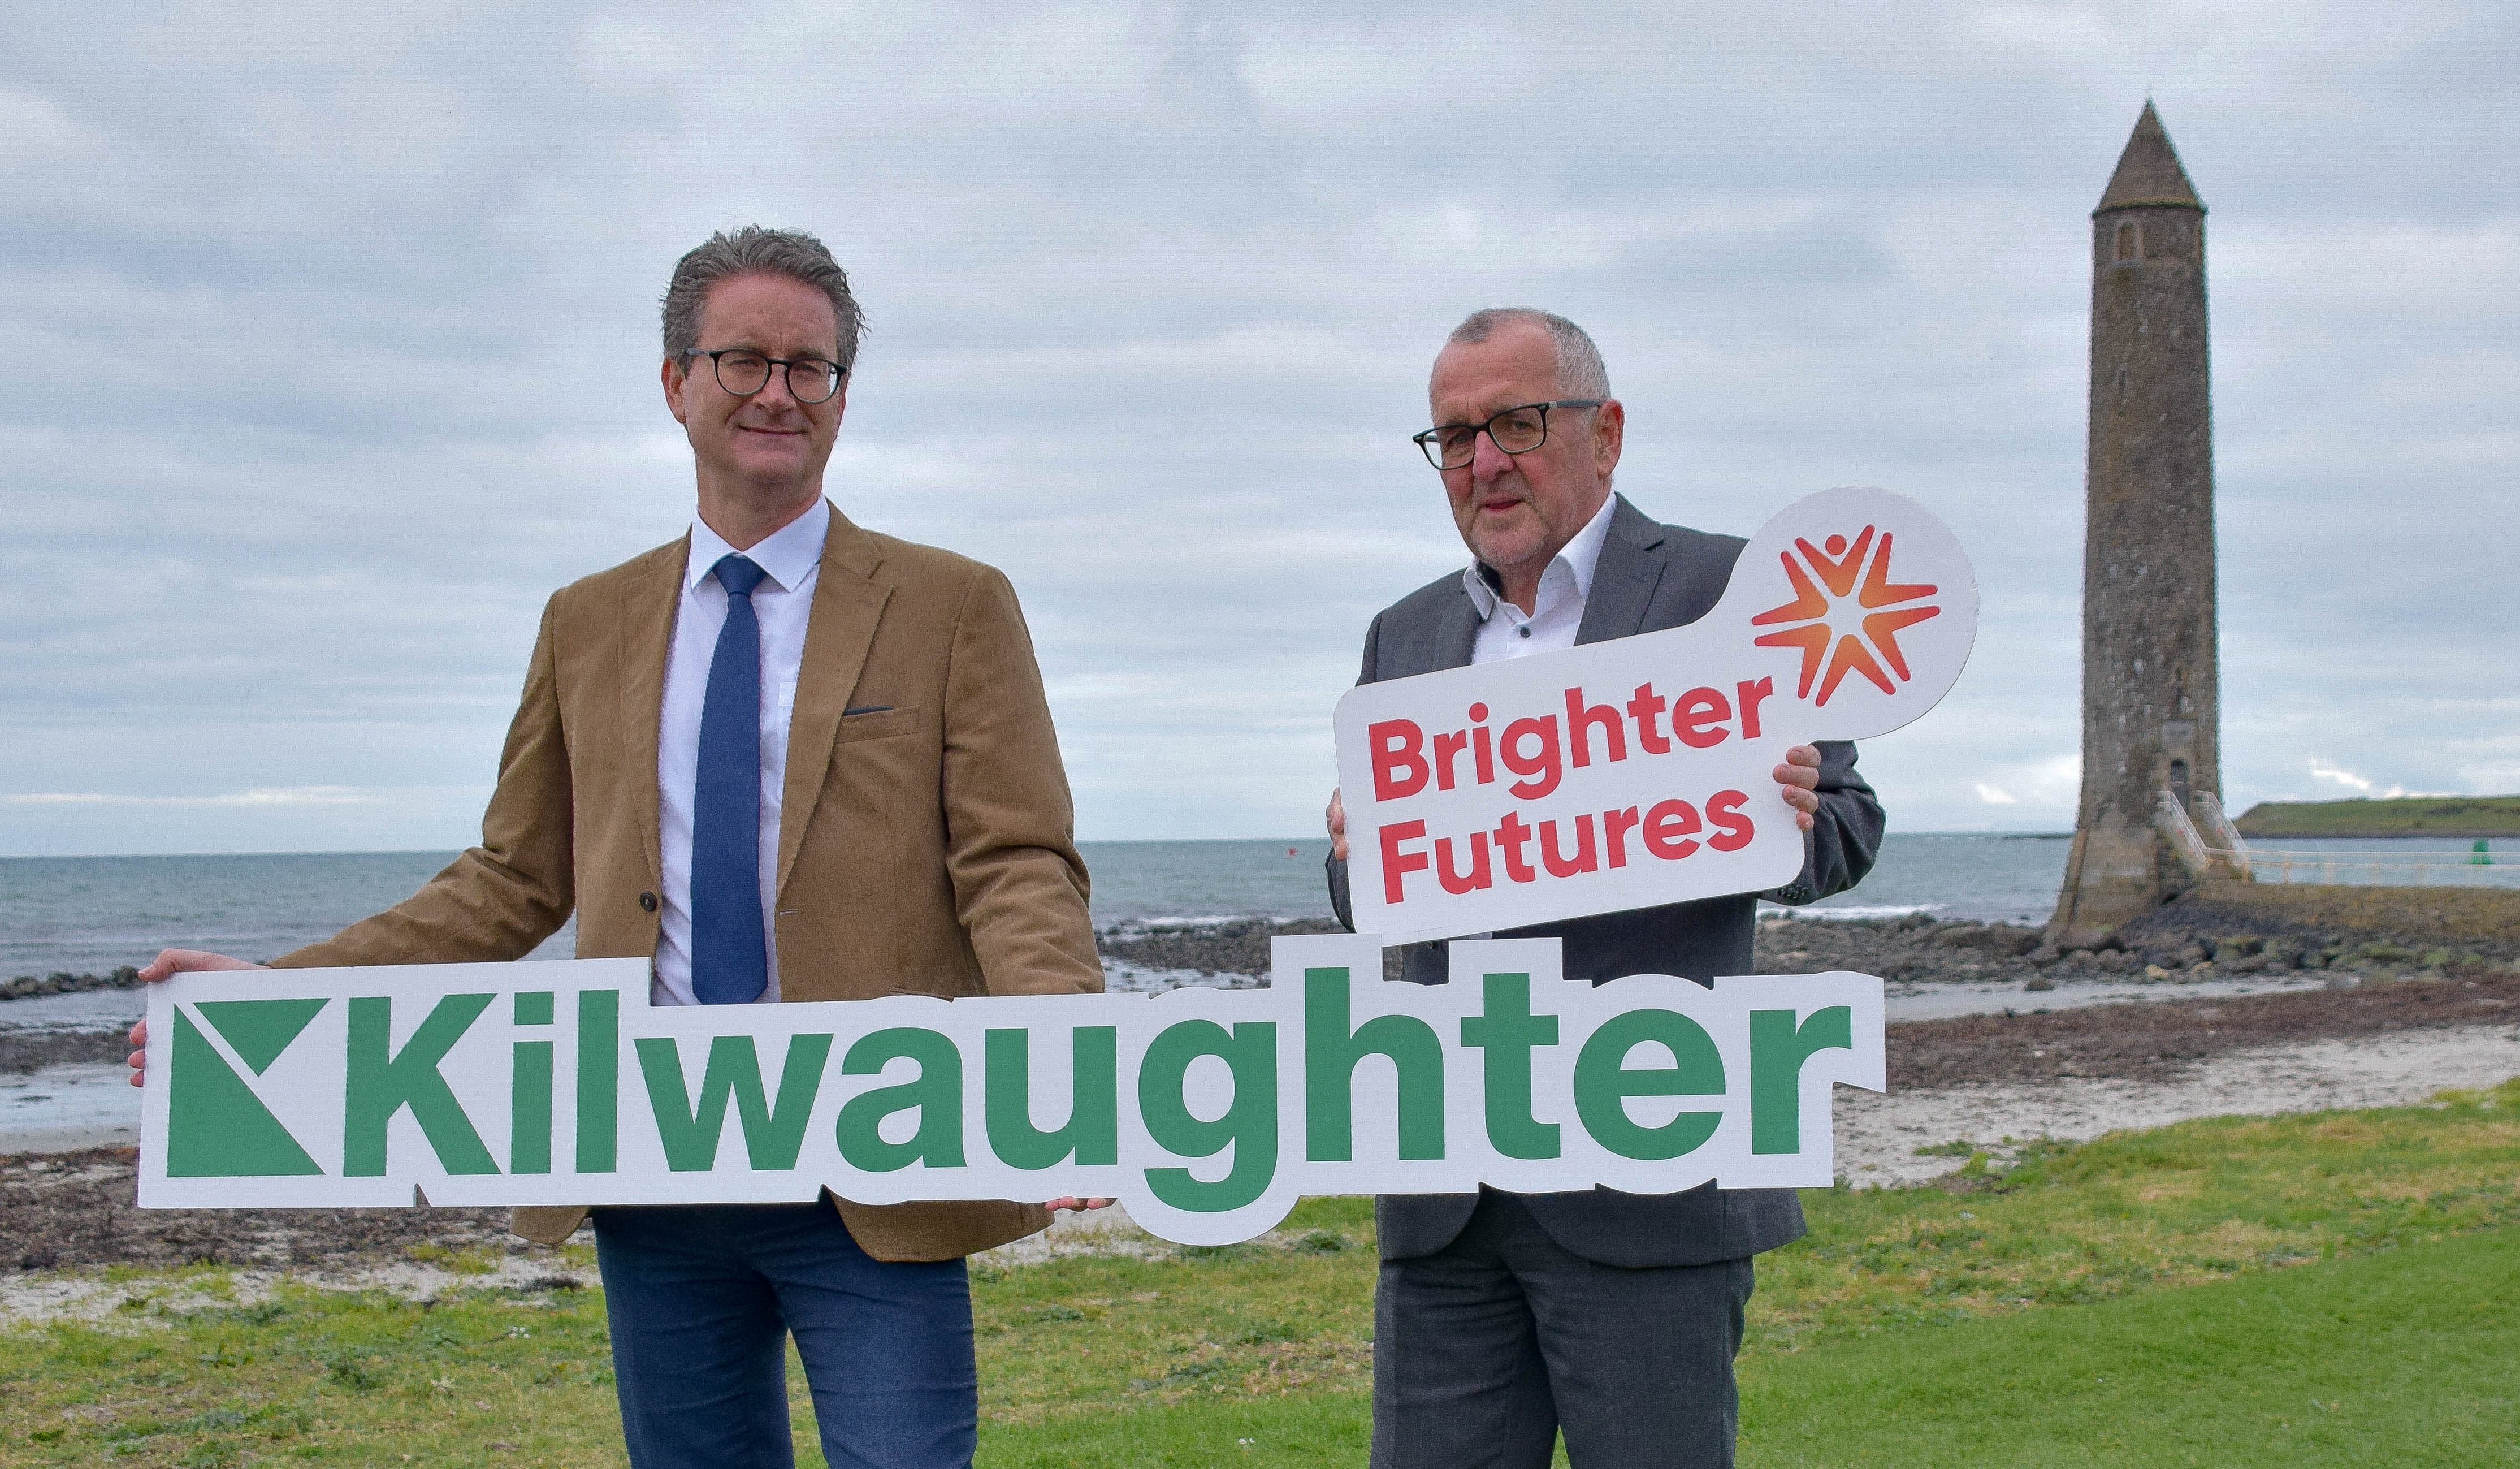 Kilwaughter Minerals doubles commitment to Brighter Futures